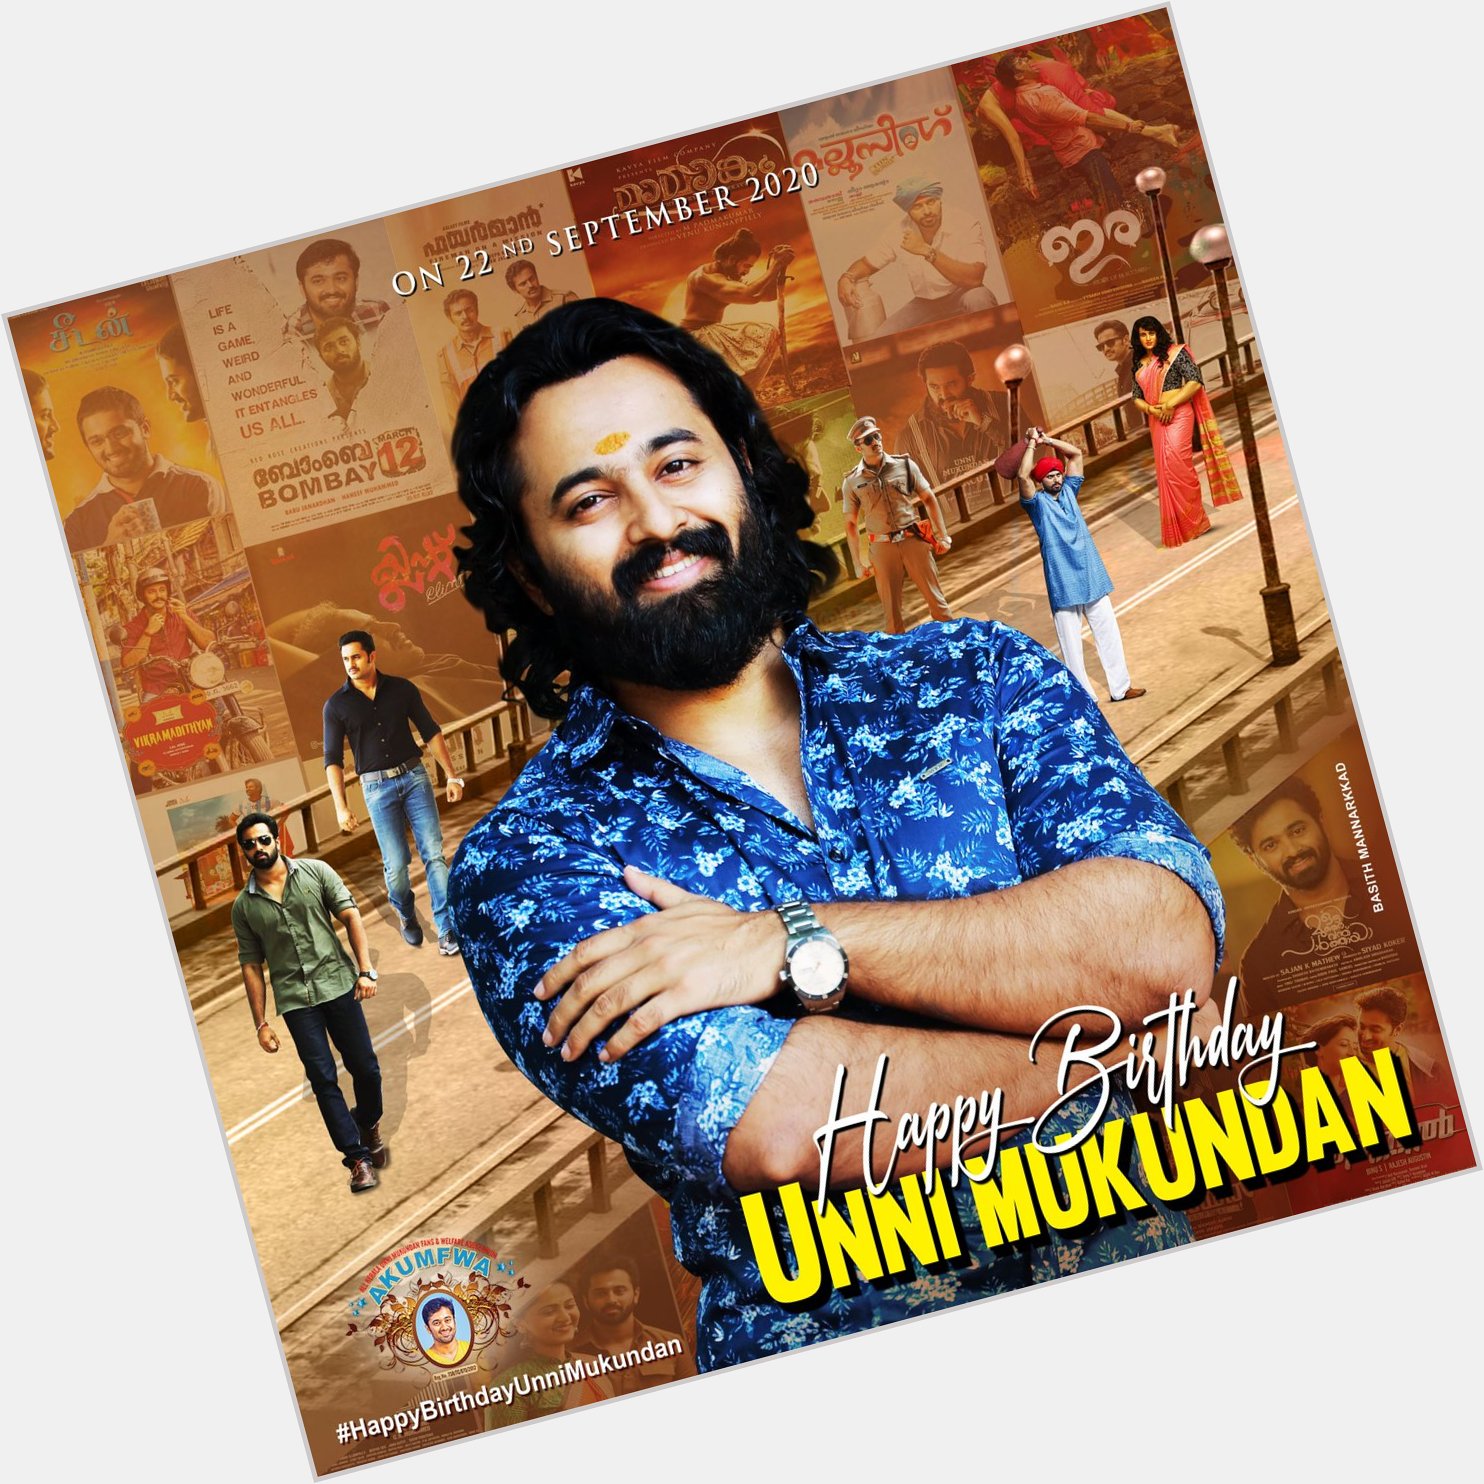 Happy to launch the CDP!! 
Advance birthday wishes to Unni Mukundan!  